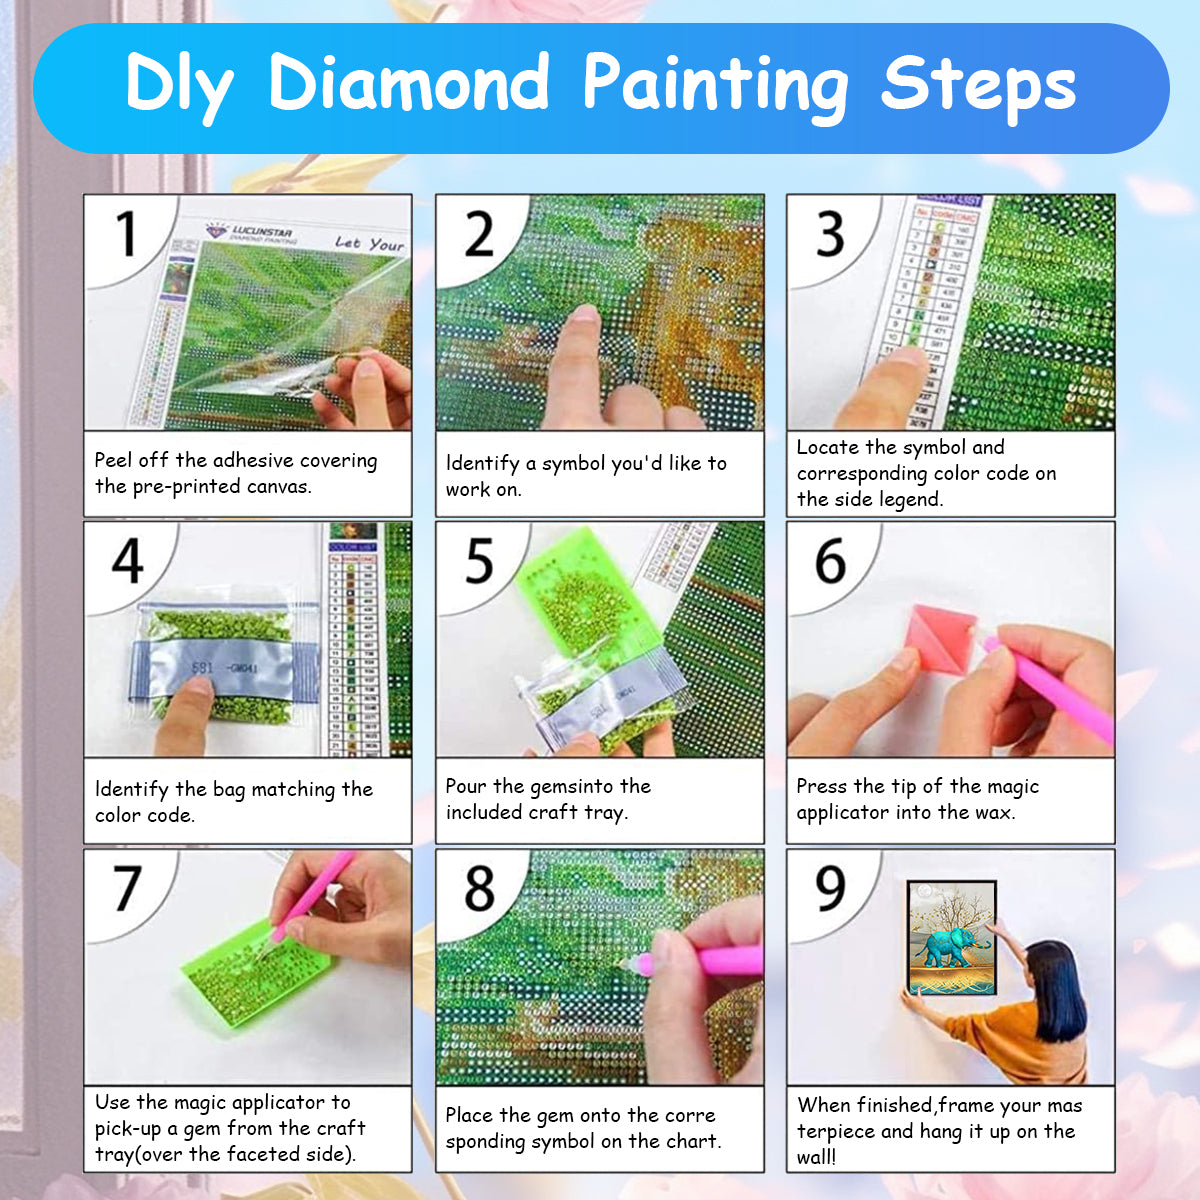 HASTHIP® Diamond Painting Kit, 12x16inch Blue Elephant Diamond Painting, 5D Diamond Painting Kit for Adults & Kids, Very Suitable for Home Leisure and Wall Decoration, Gift for Kids and Adults